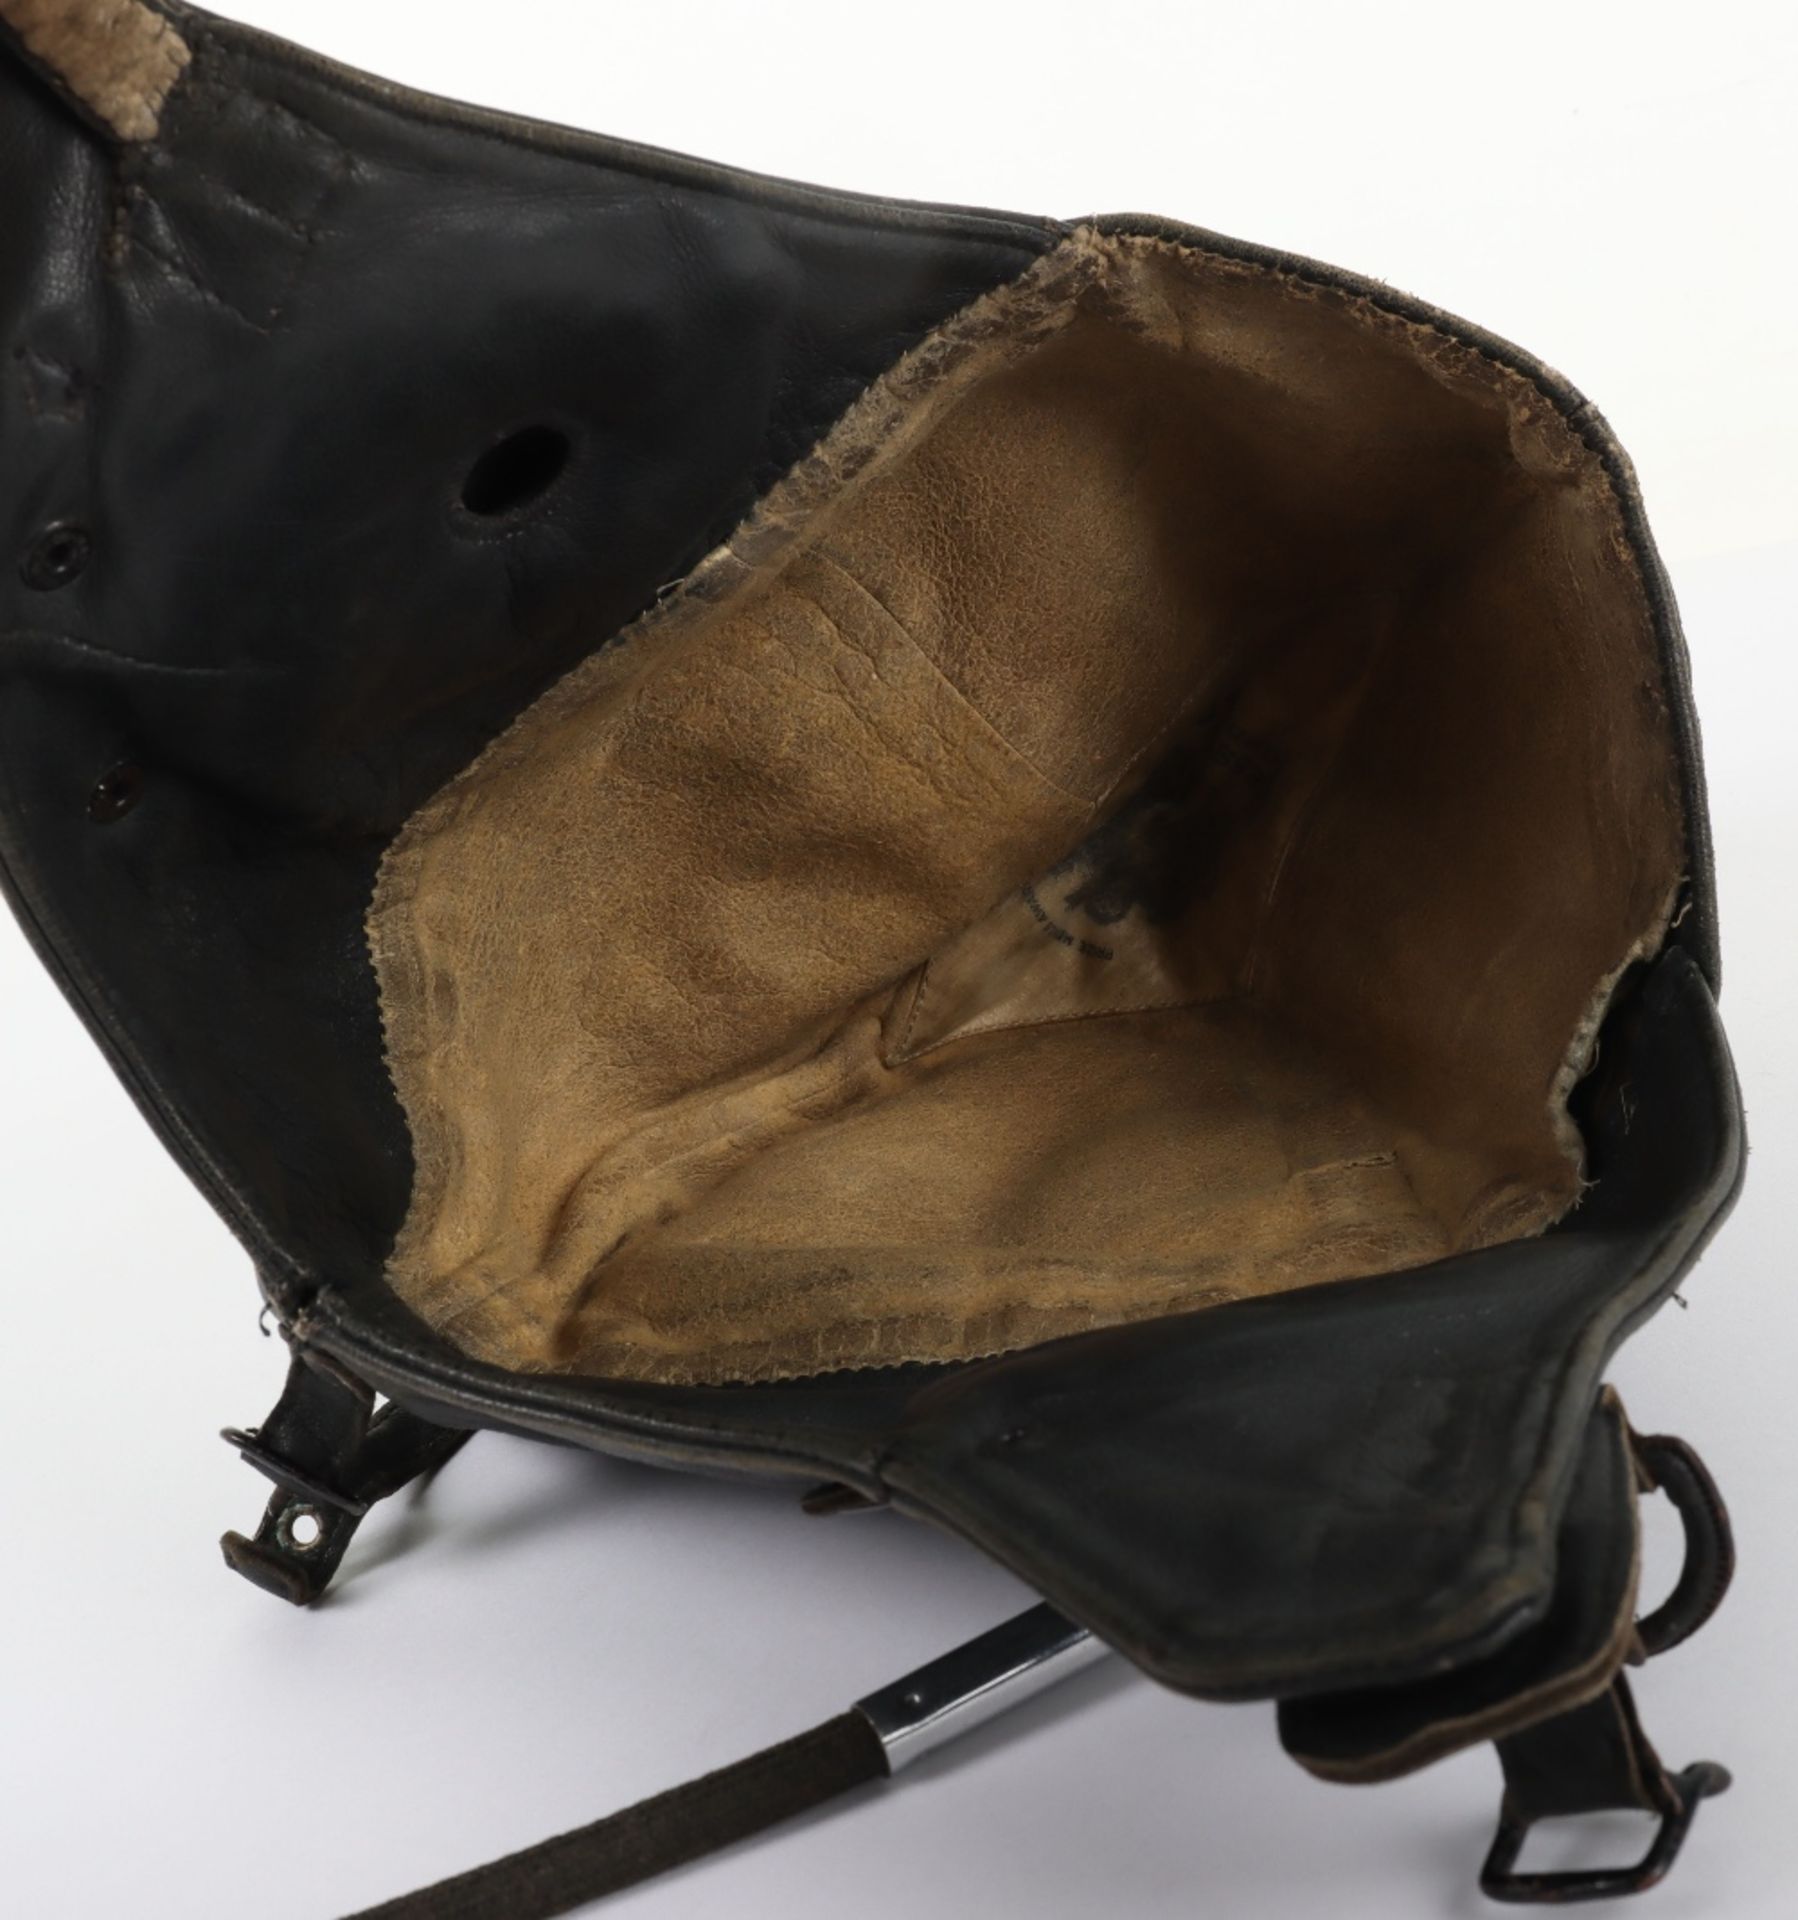 Early Lewis Style Black Leather Flight Helmet with Gosport Tubes - Image 6 of 8